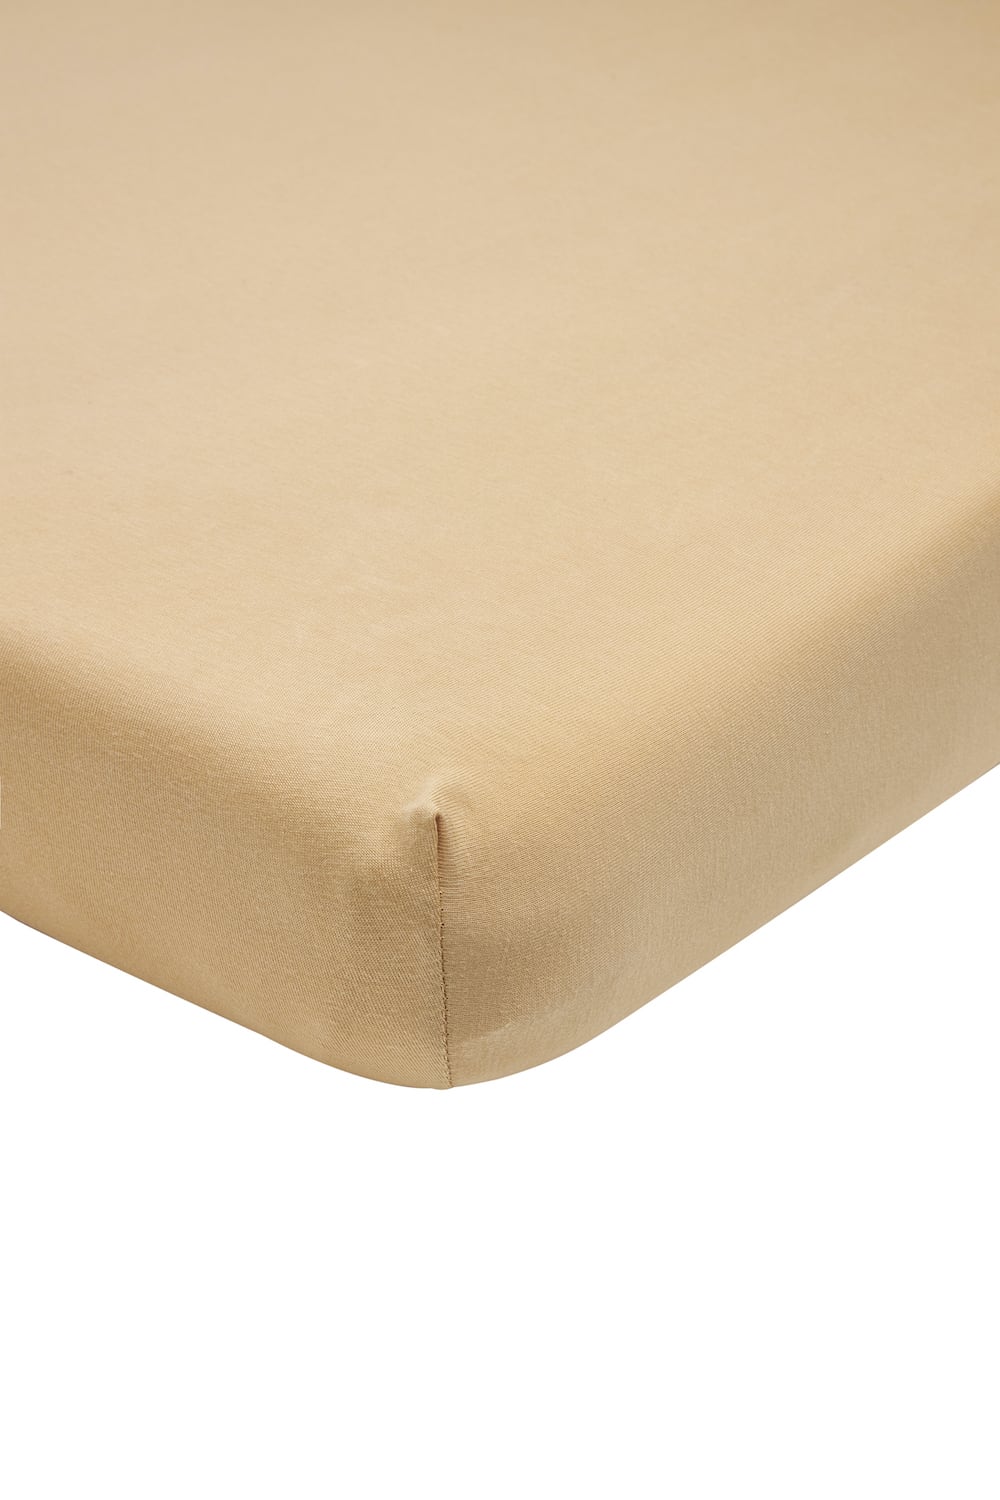 Hoeslaken 1-persoons Basic Jersey Warm Sand (80x210/220cm)